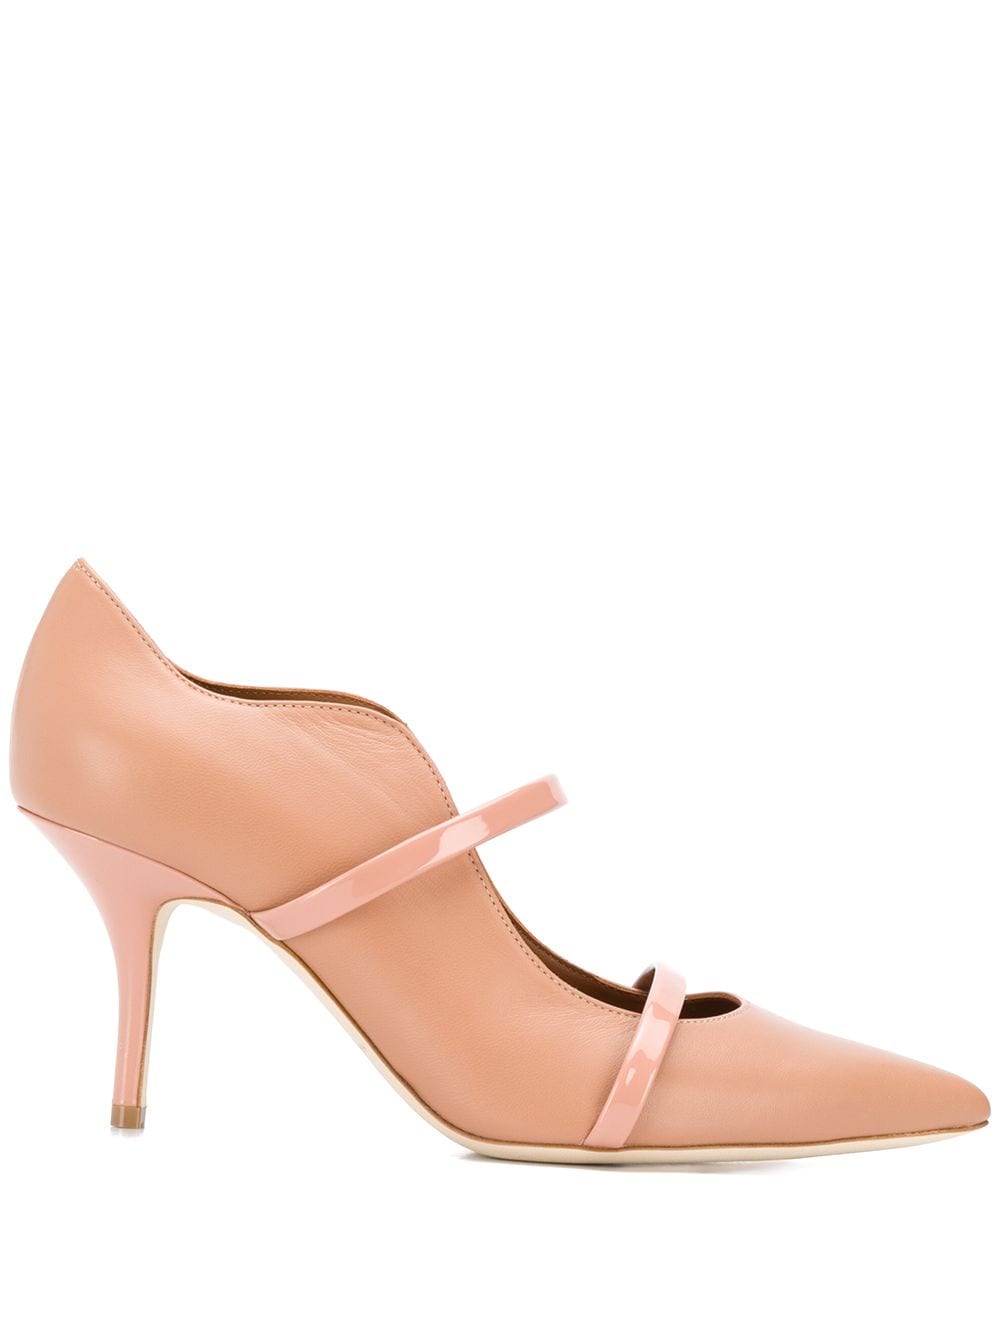 Malone Souliers 'Maureen' Pumps - Nude von Malone Souliers